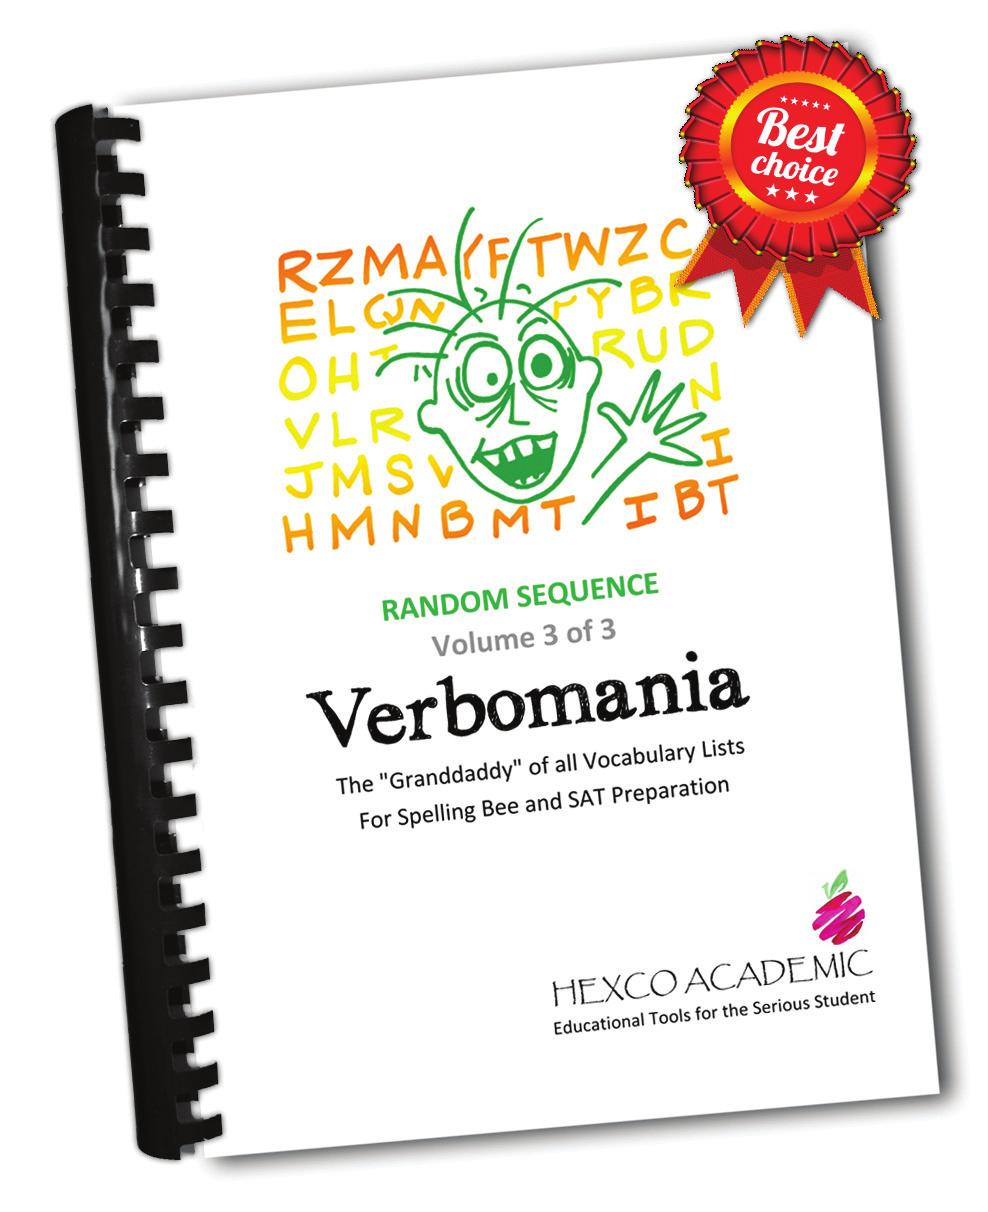 Verbomania & Verbo ementor! Now in ementor format! Verbomania means "passion, craze, or obsession with words!